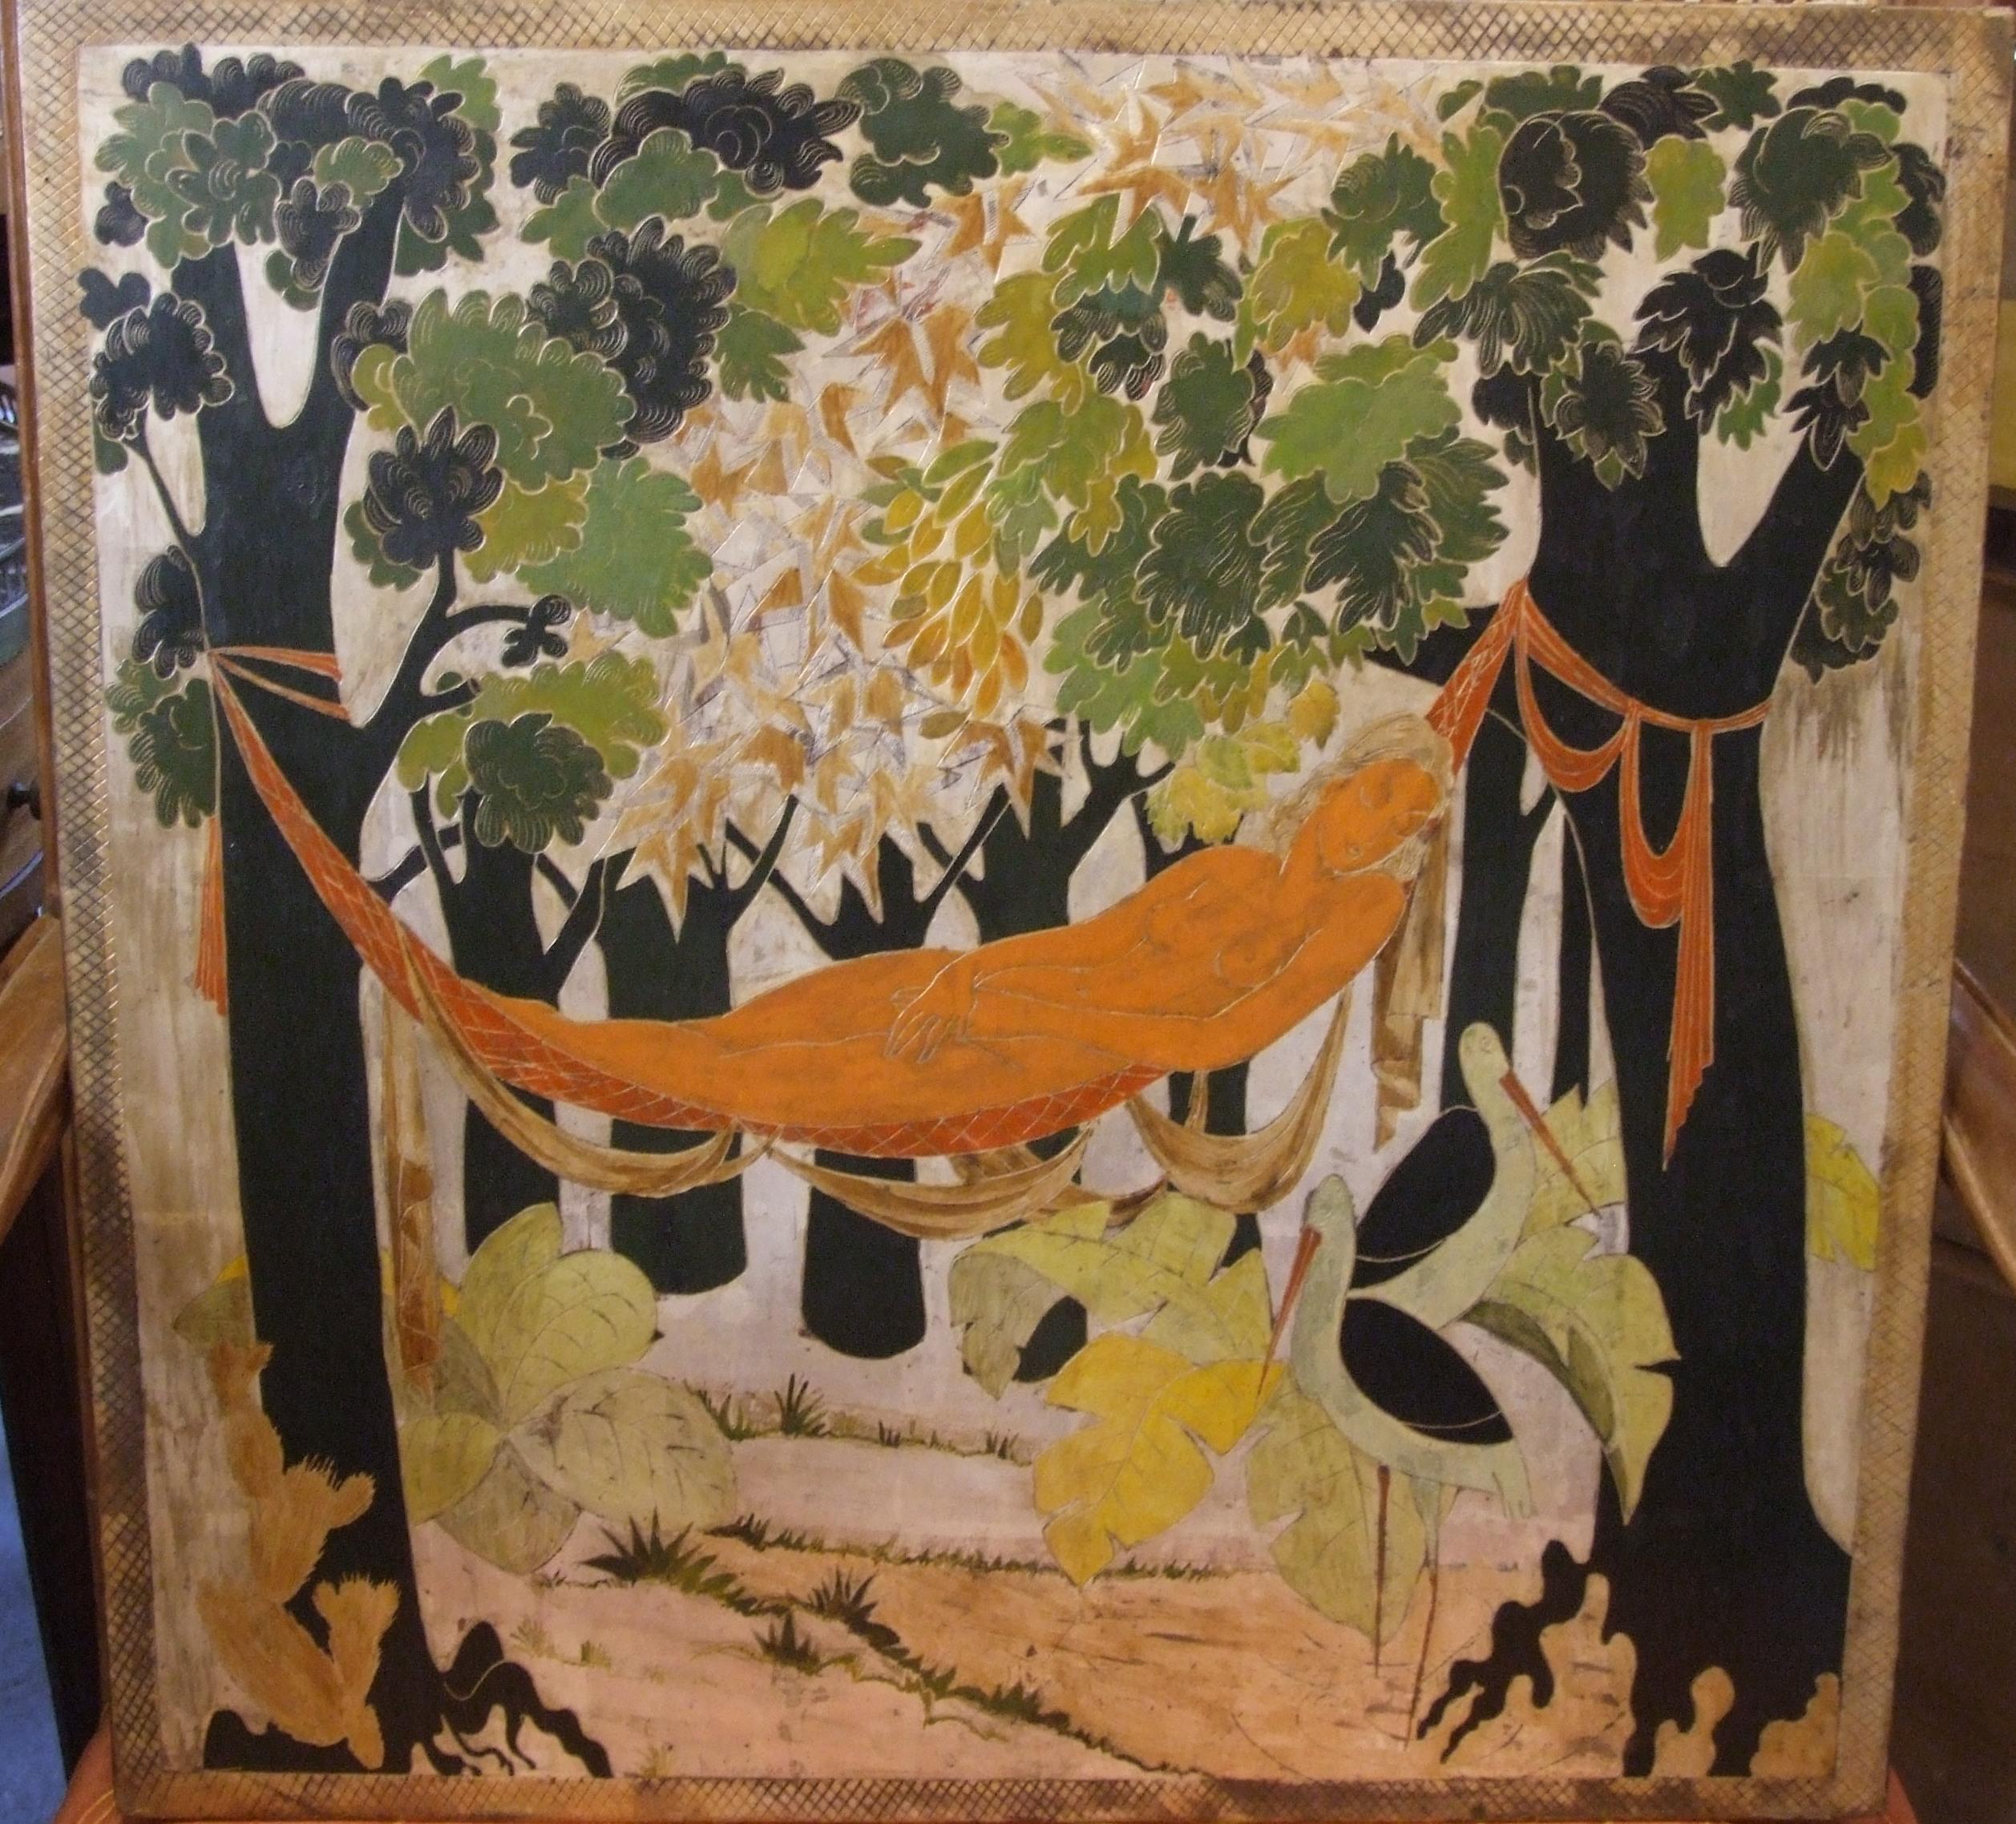 A. Cavenago Figurative Painting - woman in the wood, '30s - lacquer on wood panel, 50x51 cm.